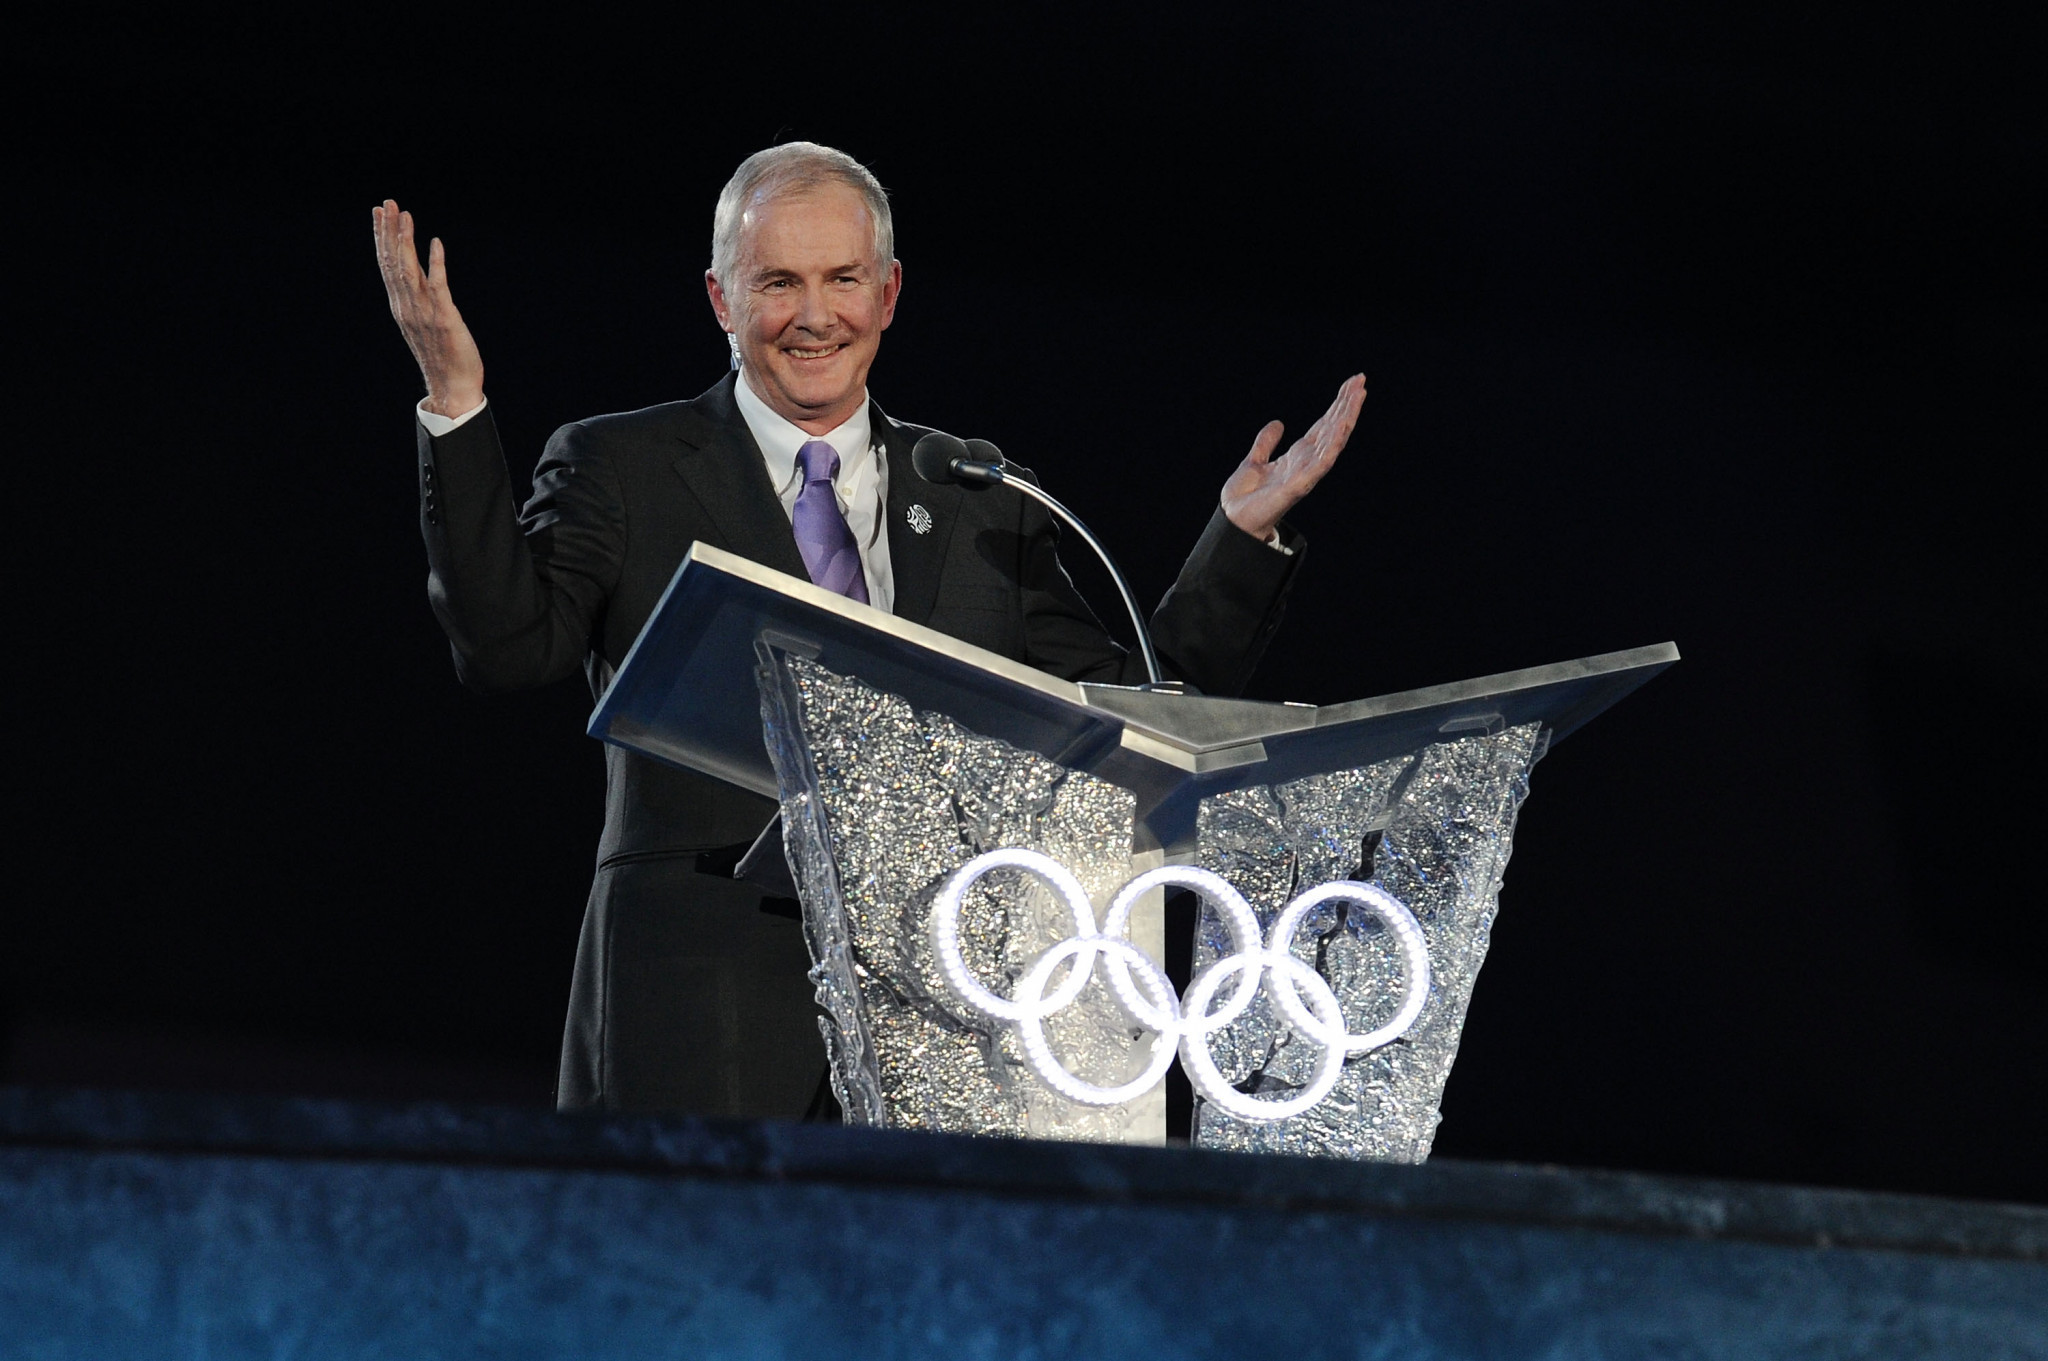 John Furlong, former chief executive and President of Vancouver 2010, believes another Games staged in the Canadian city will help to lift spirits following the coronavirus pandemic ©Getty Images